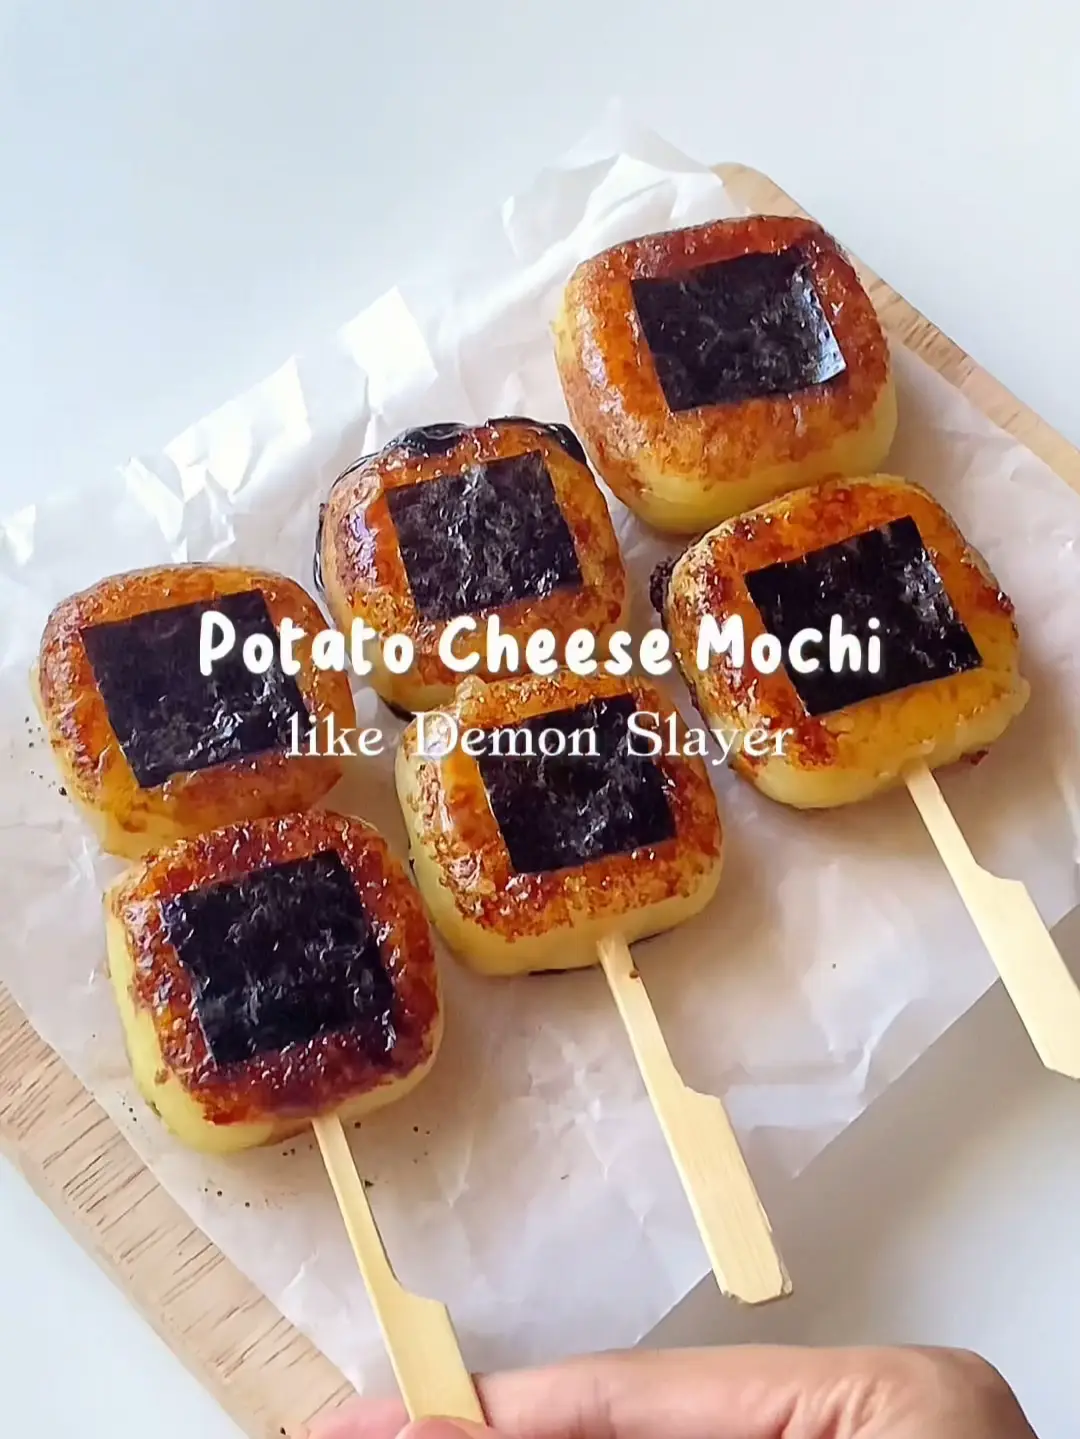 How to Make the Fried Potato Mochi from Demon Slayer